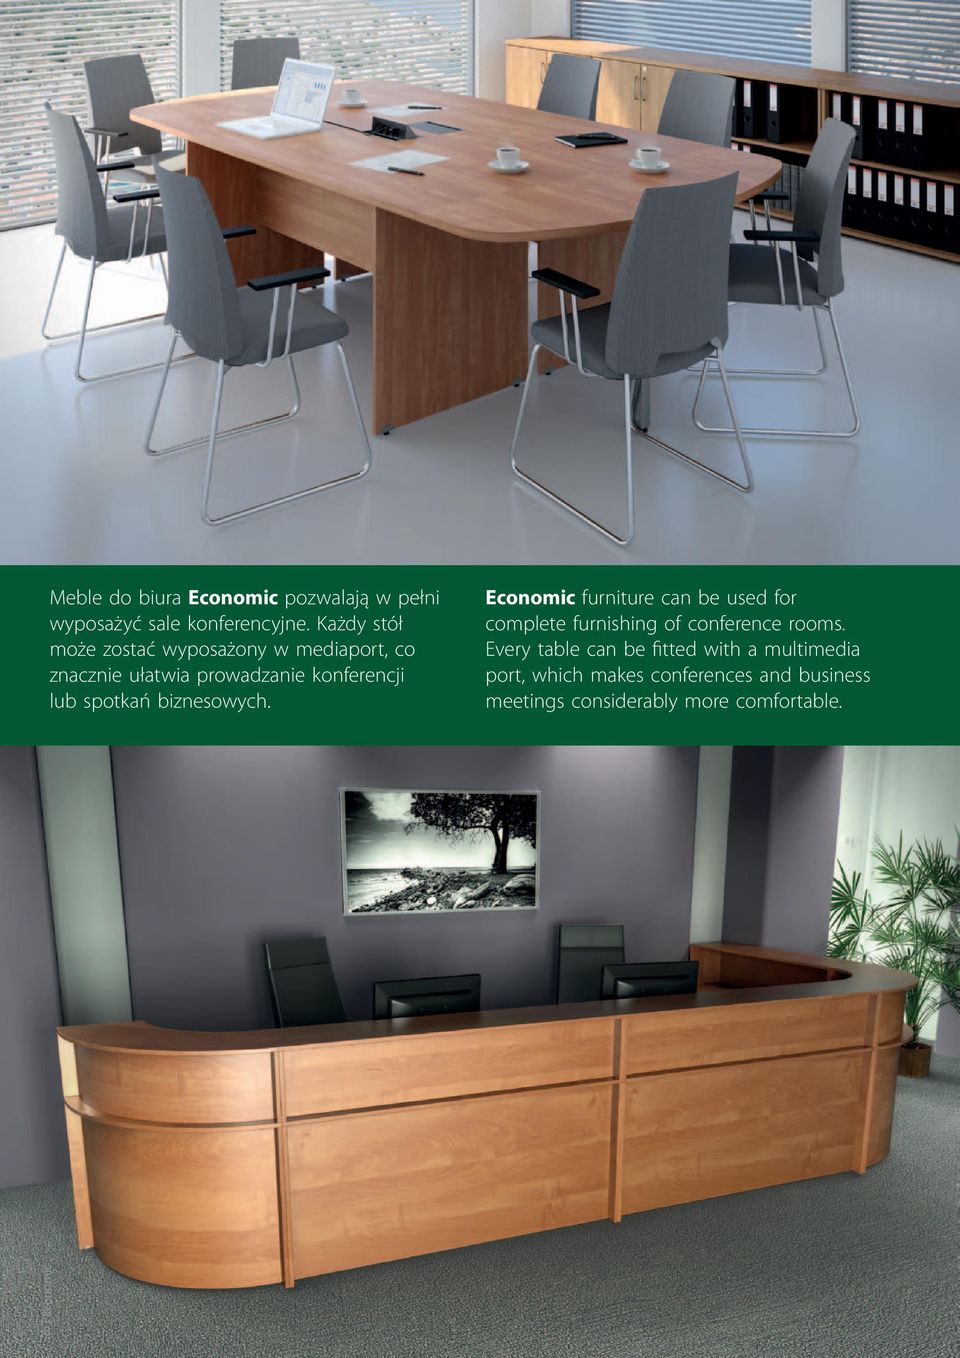 spotkań biznesowych. Economic furniture can be used for complete furnishing of conference rooms.